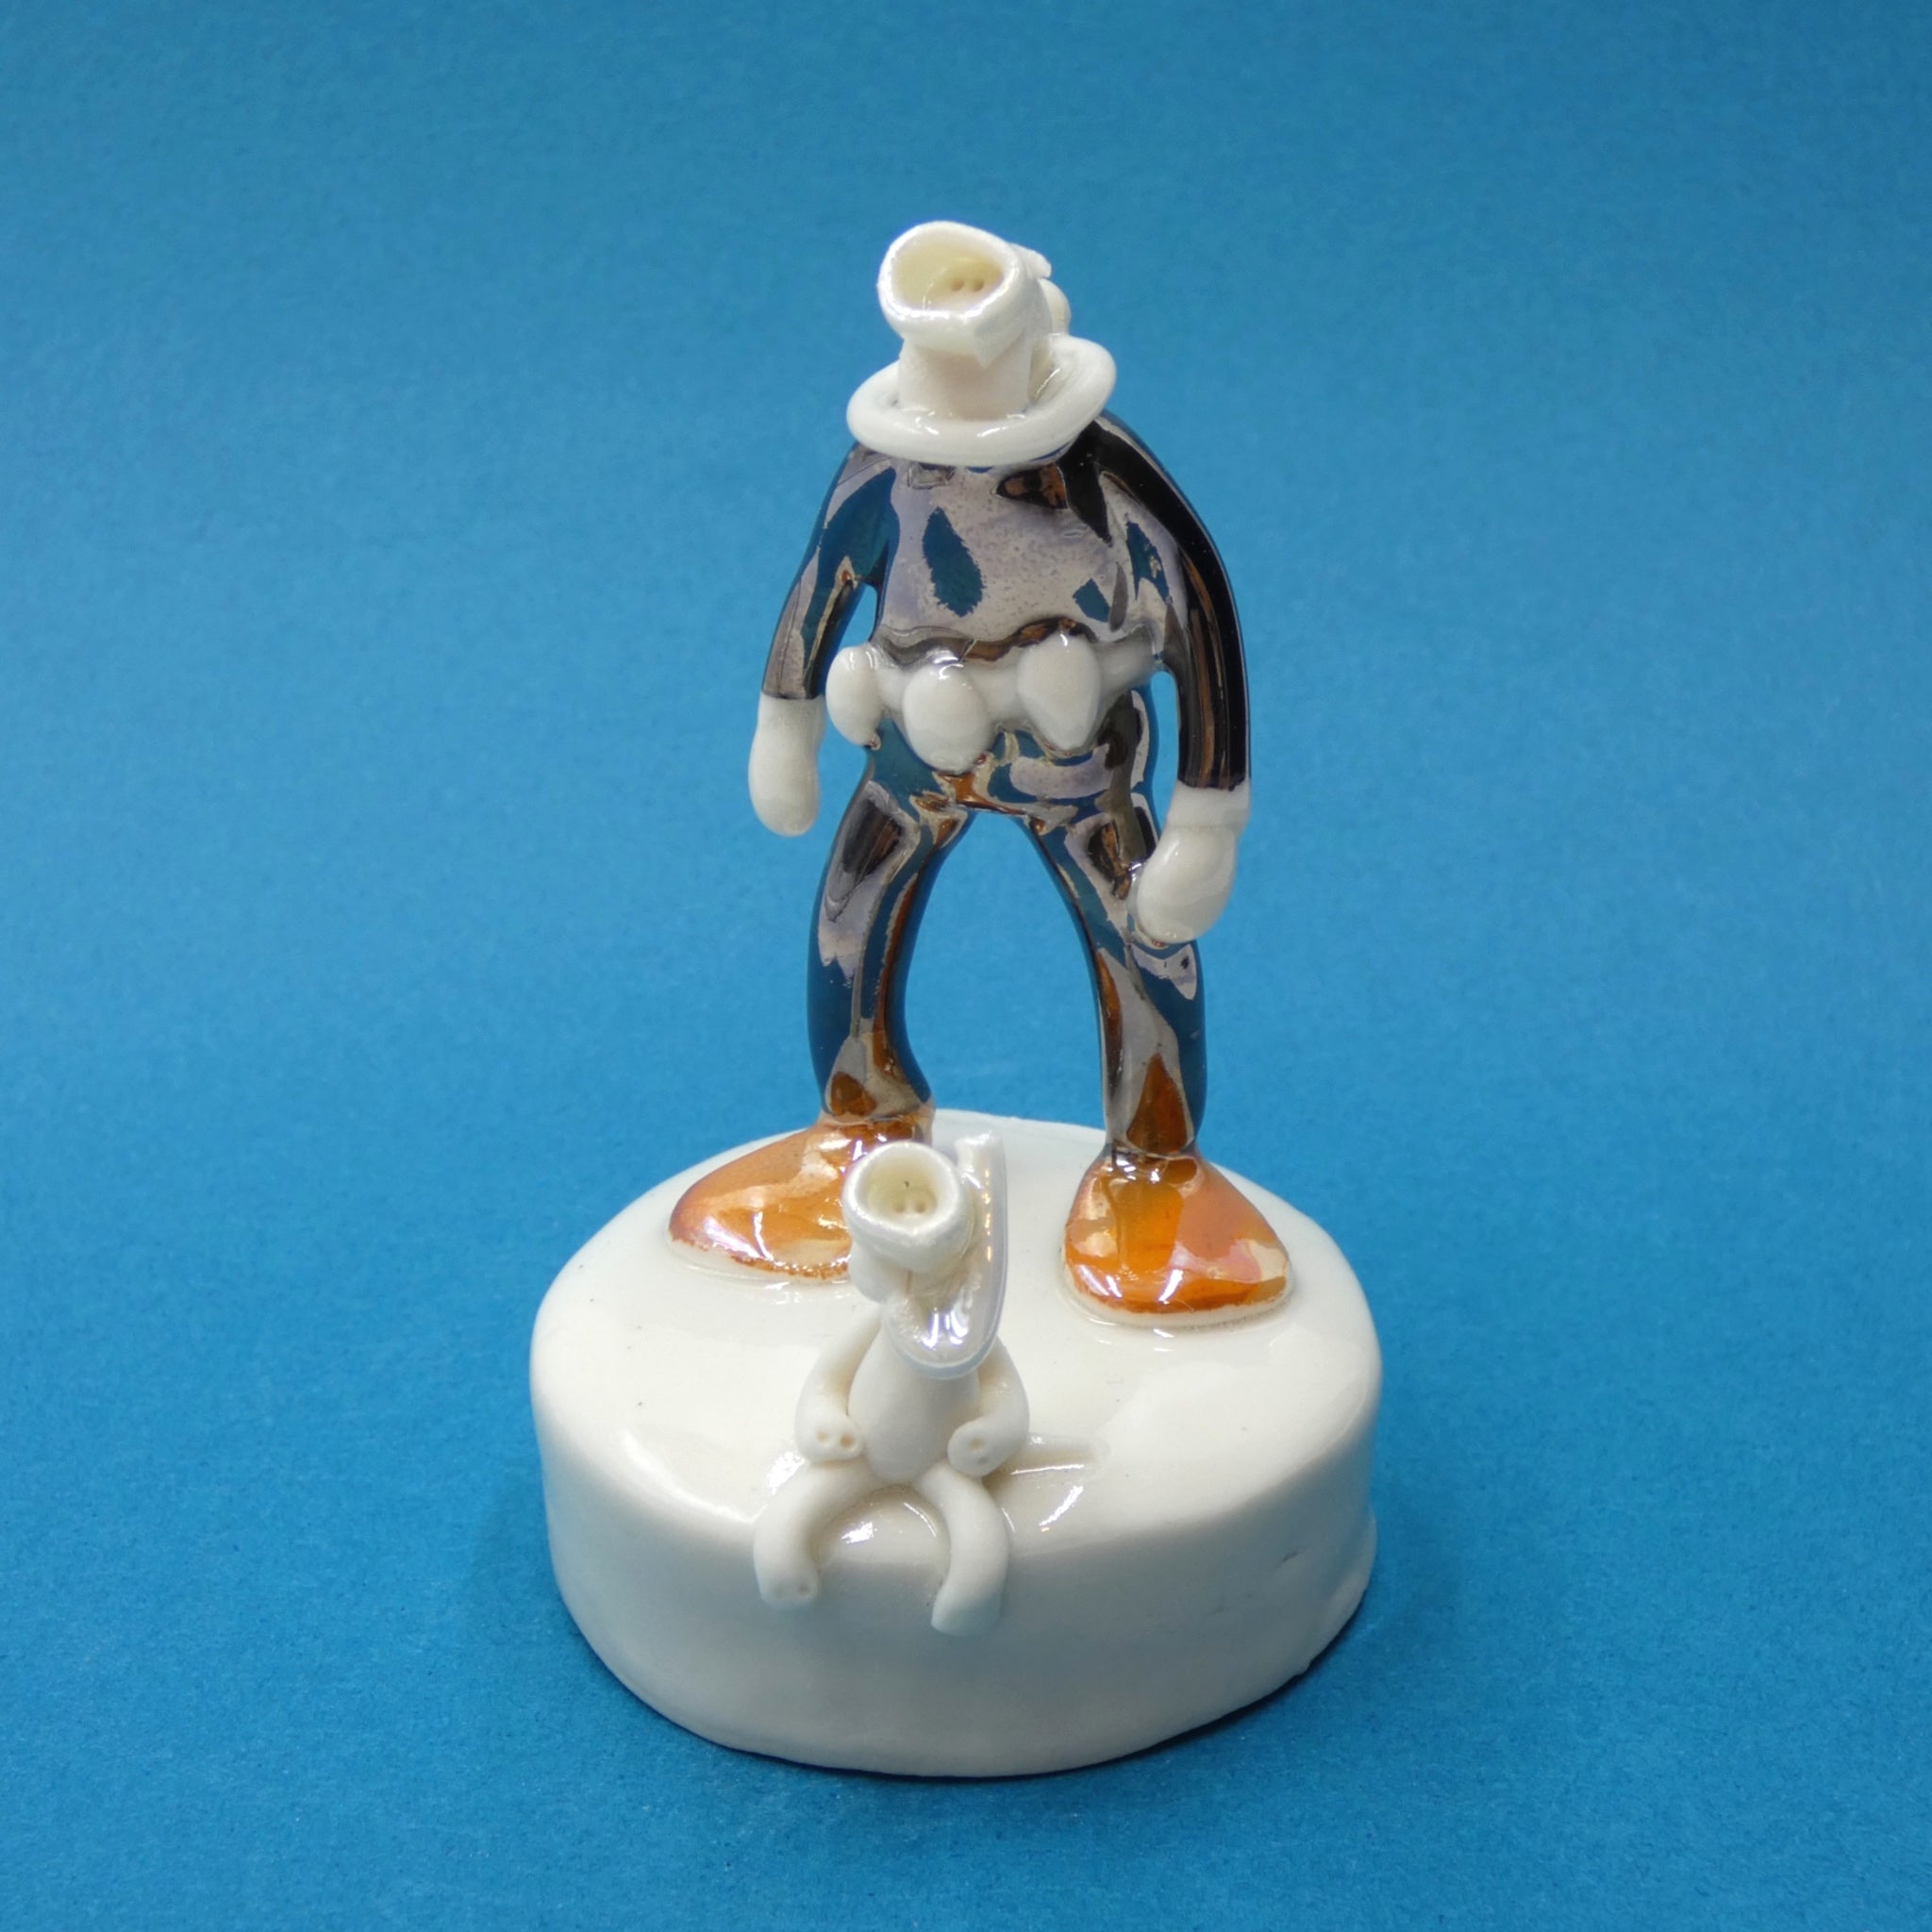 Porcelain sculpture of scuba diver and cat by artist Andrew Bull